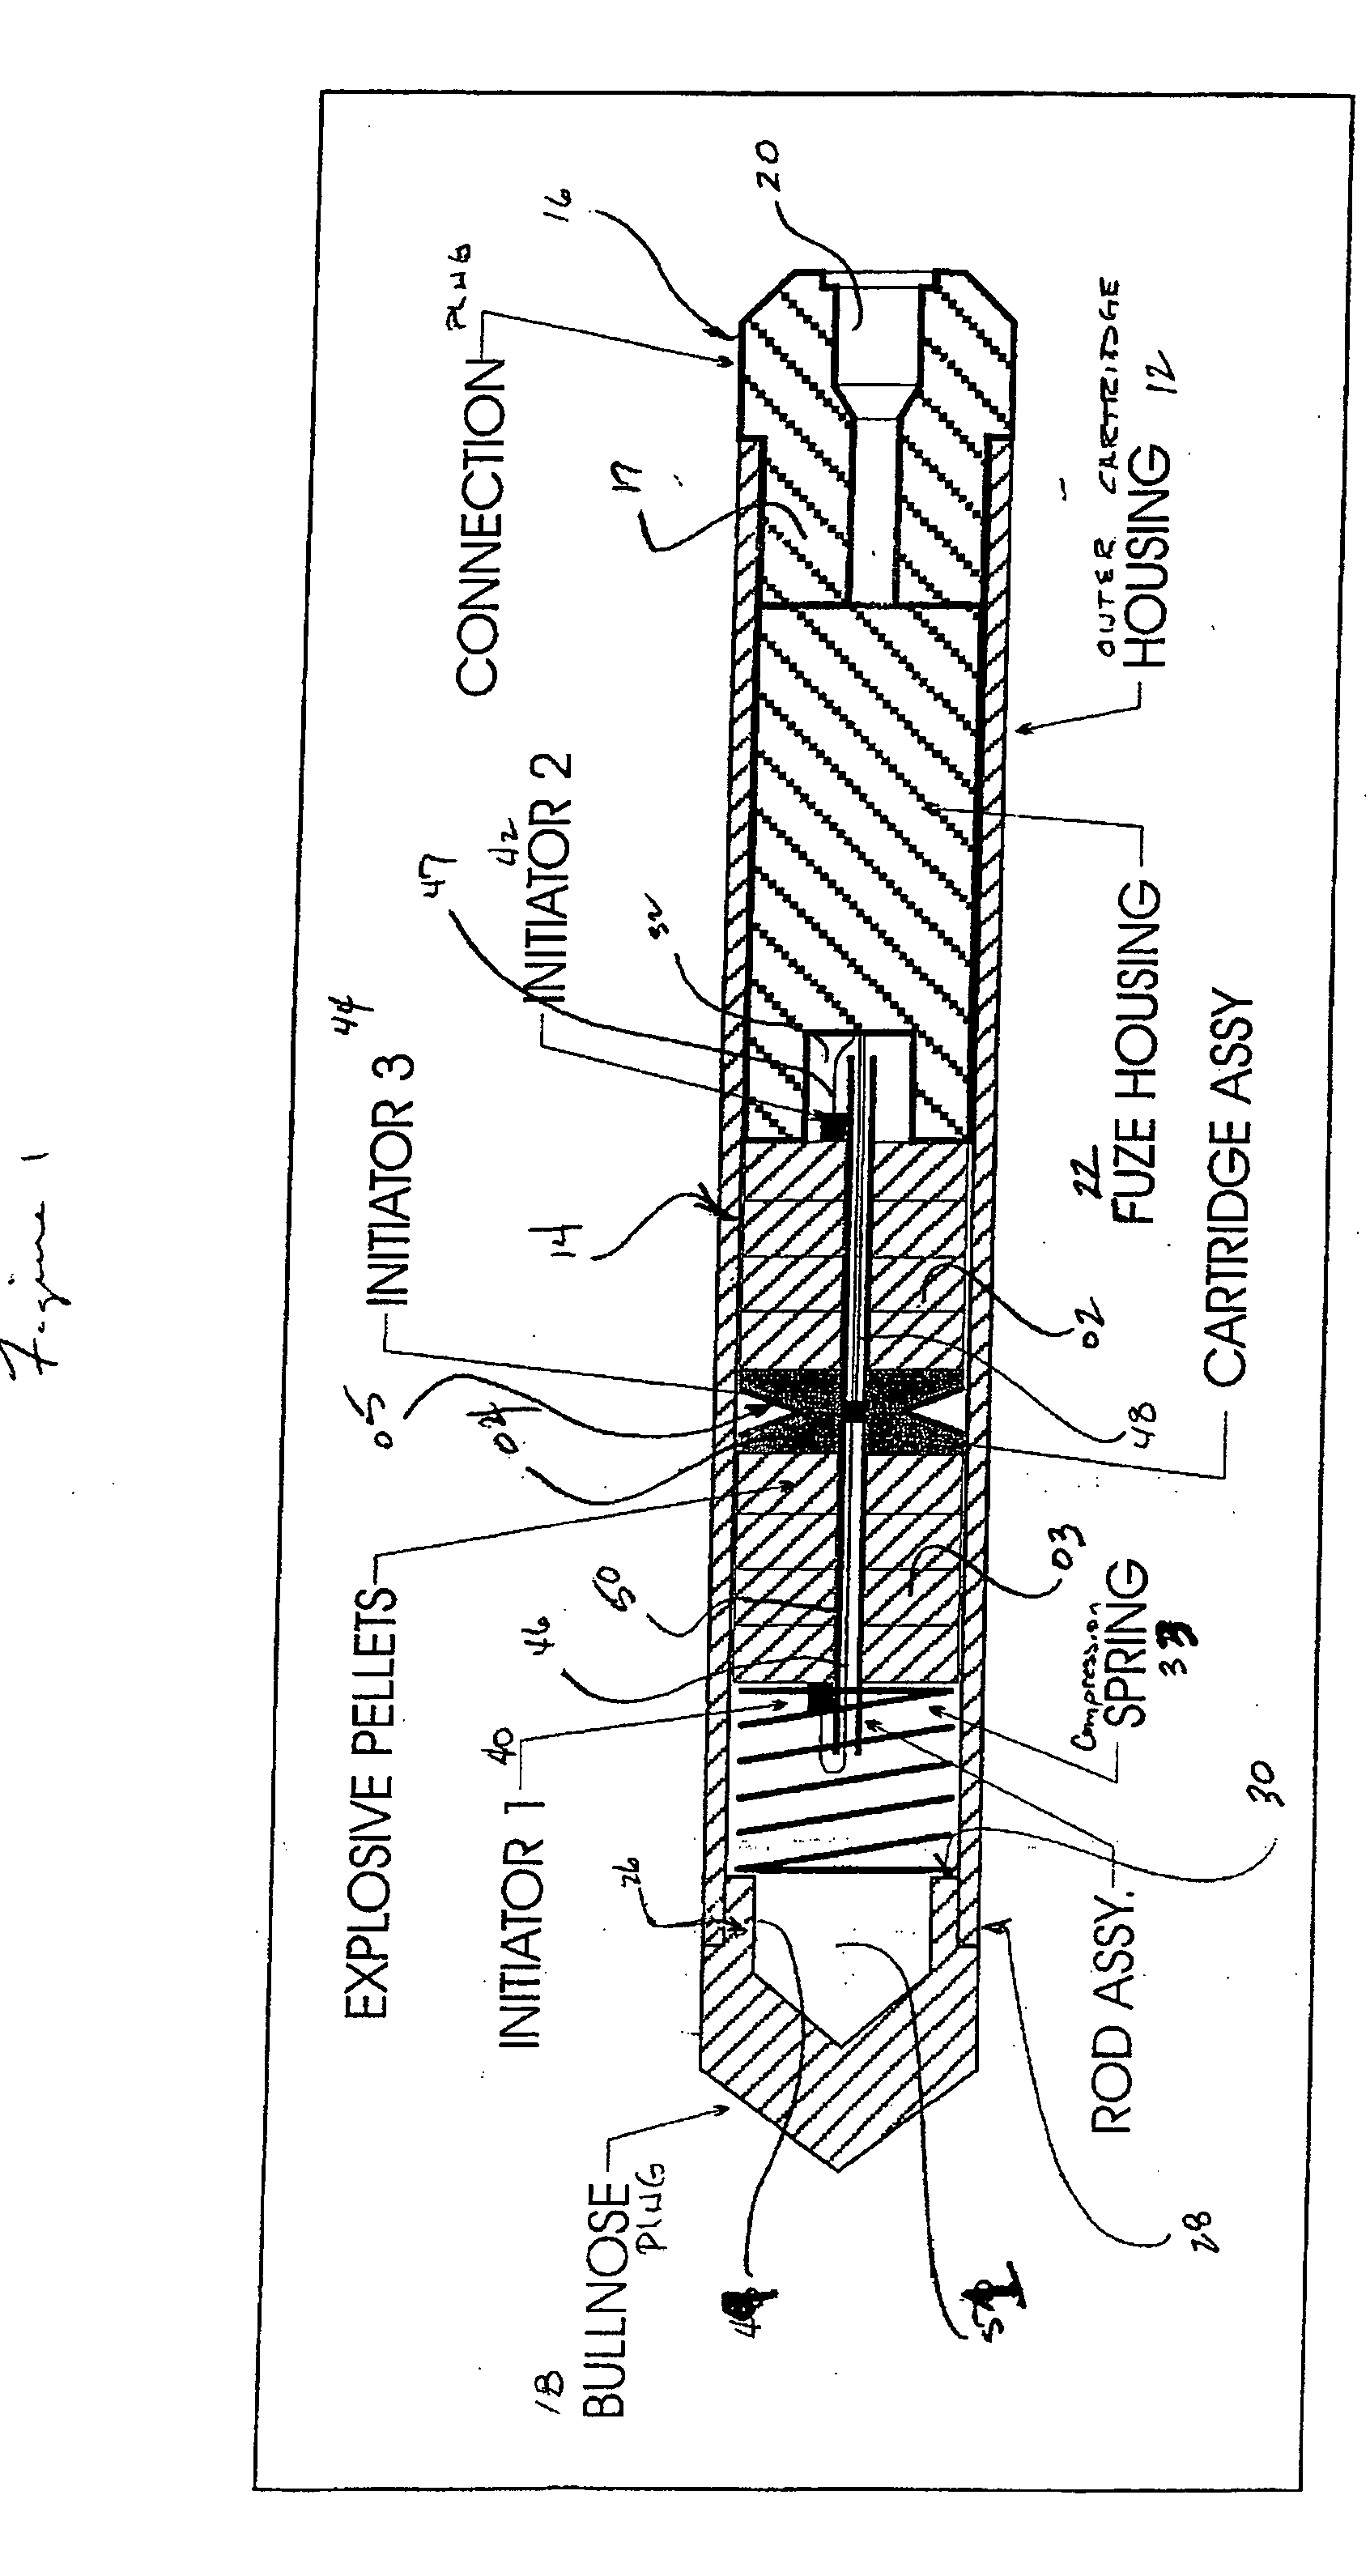 Apparatus and method for severing pipe utilizing a multi-point initiation explosive device